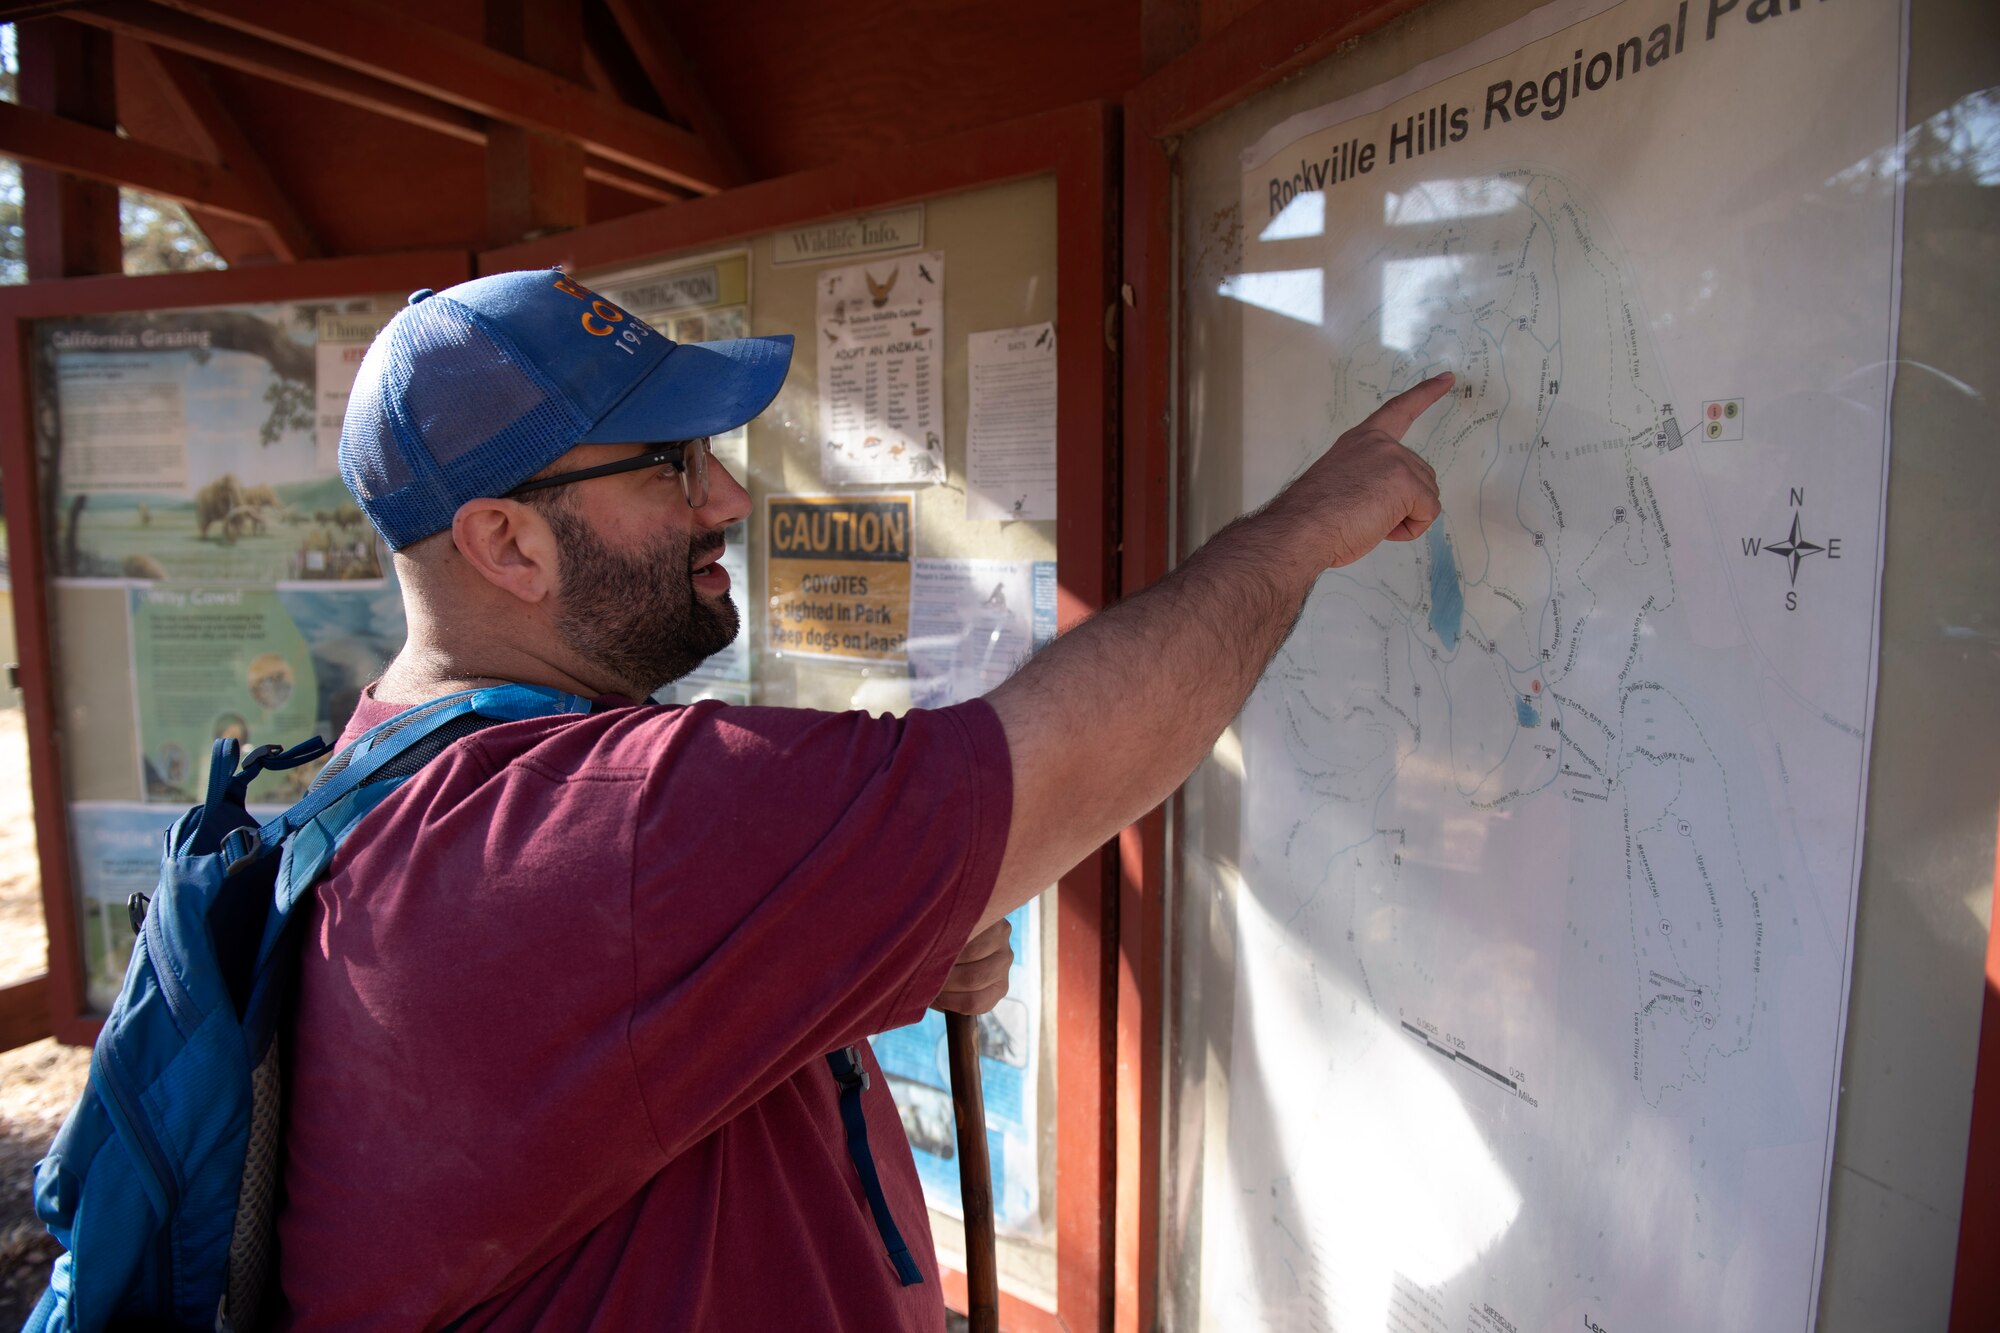 A man is touching a map near the beginning of a trail.